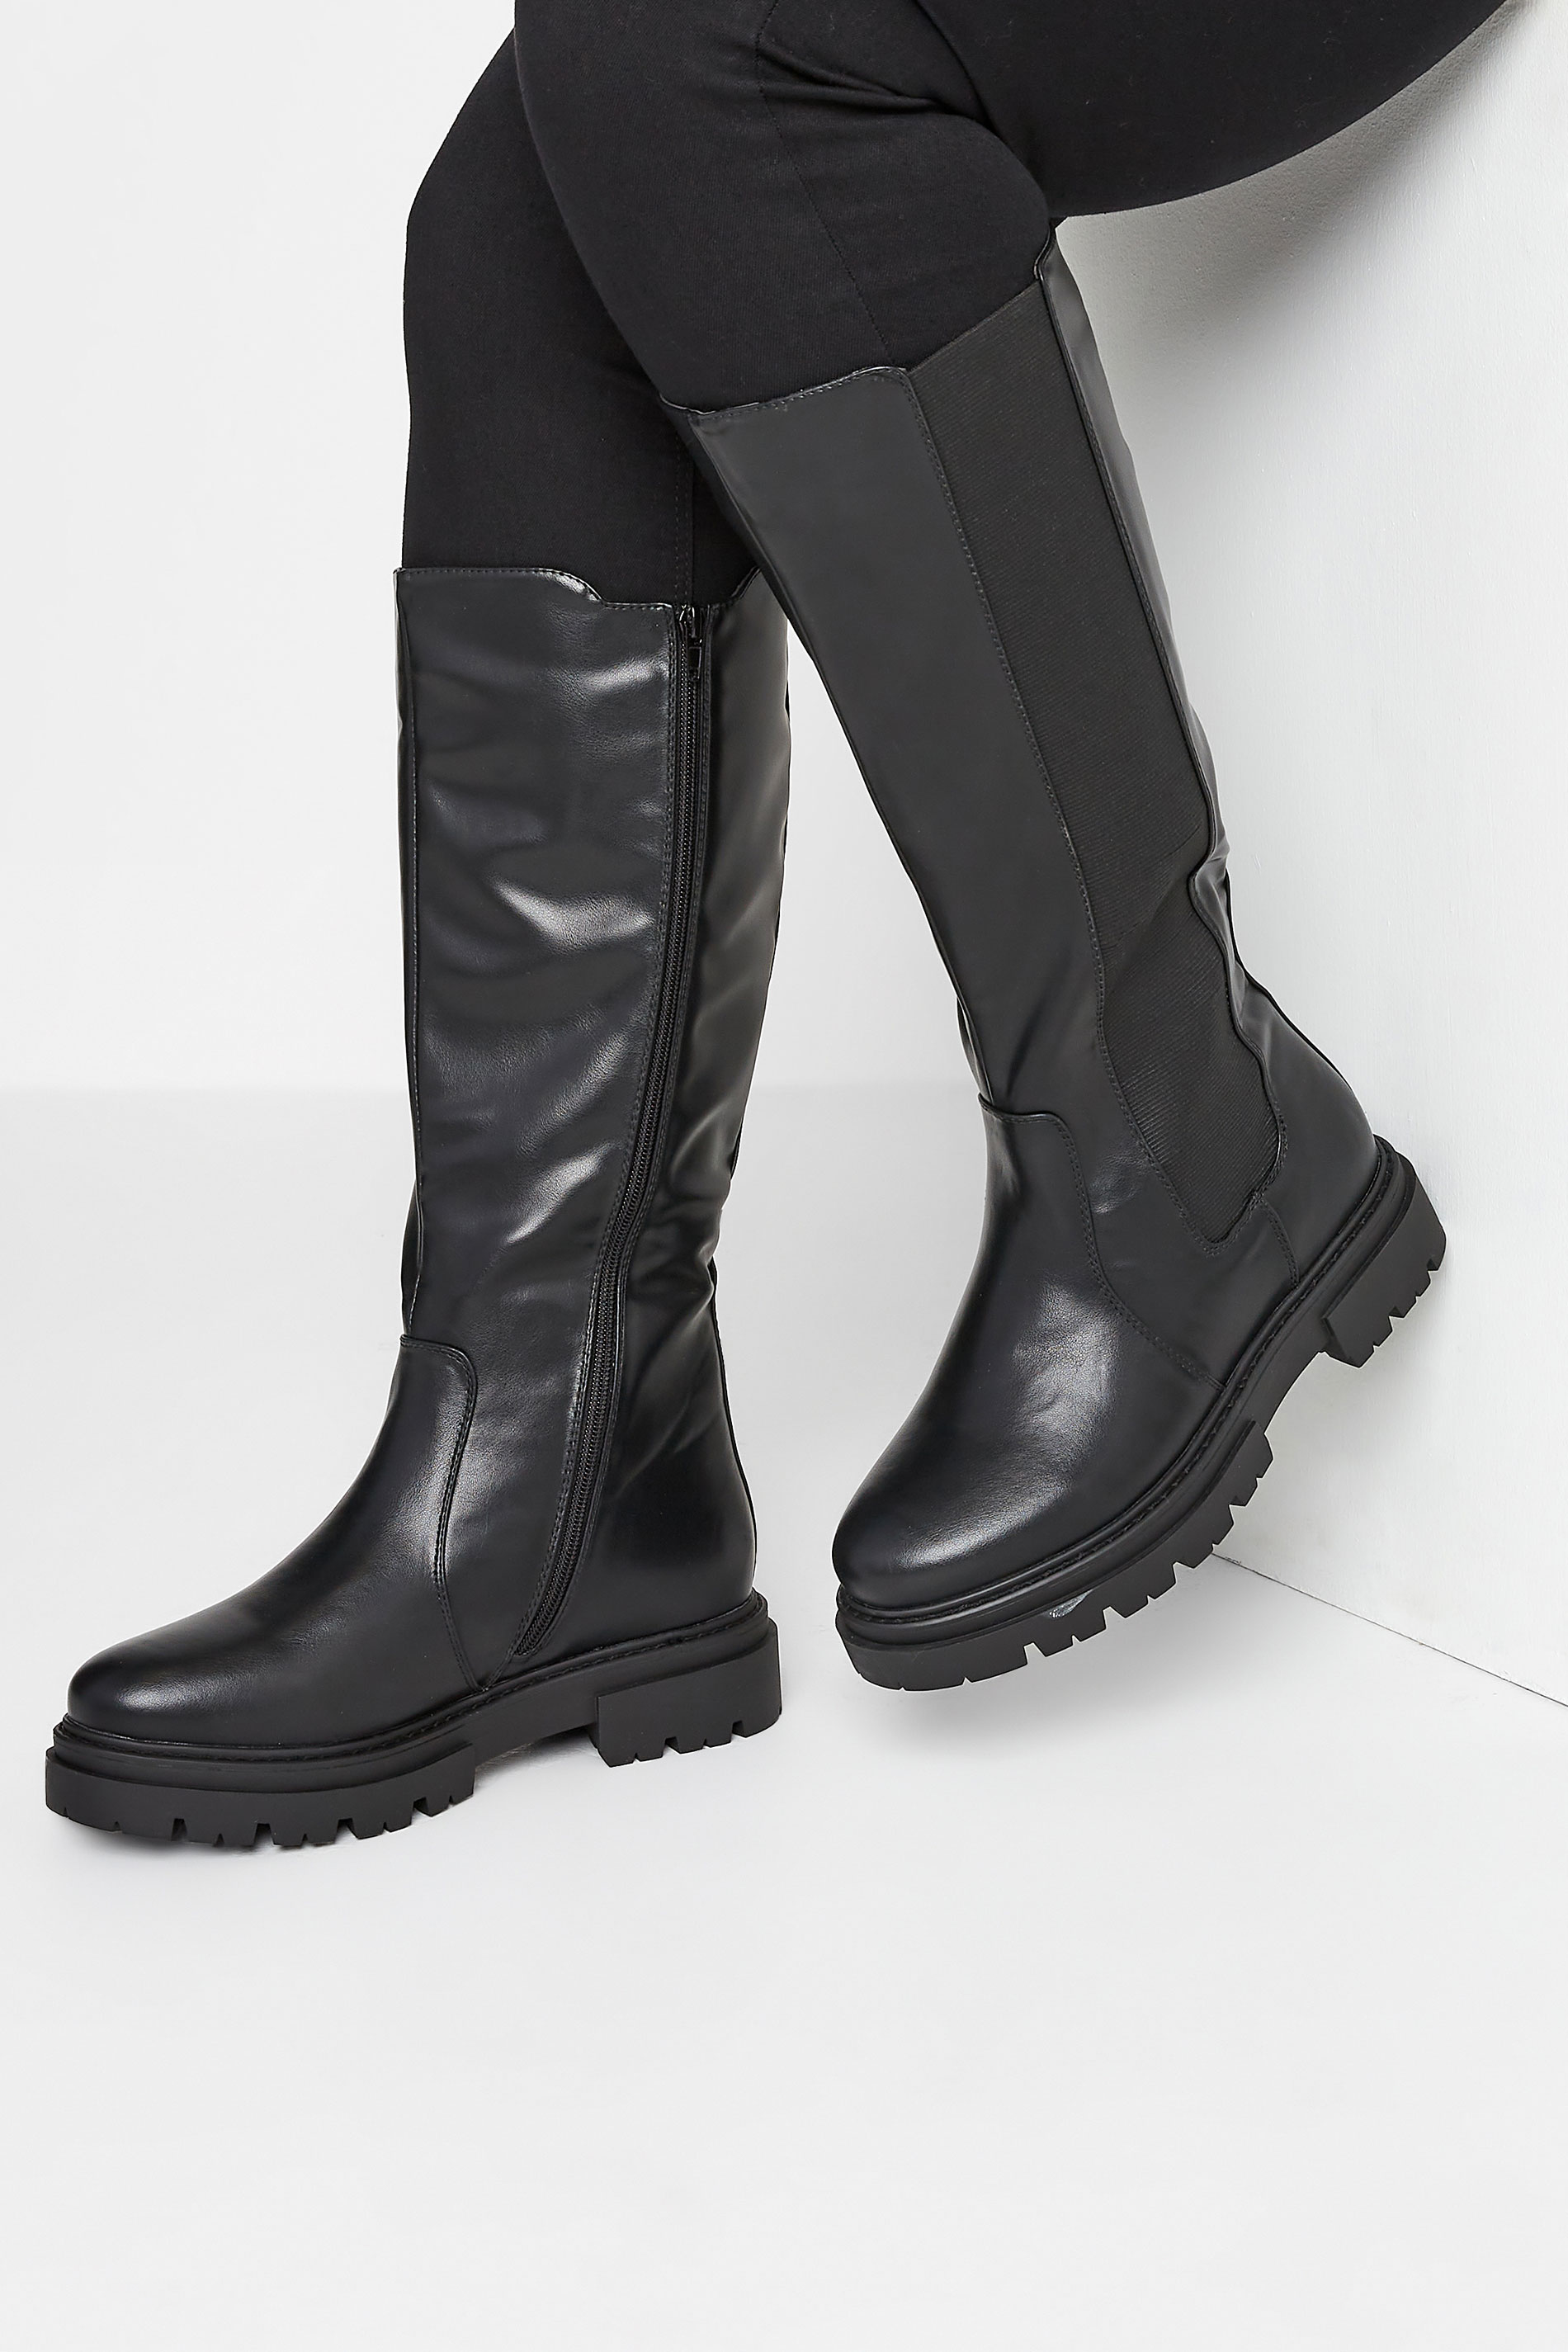 LIMITED COLLECTION Black Elasticated Knee High Cleated Boots In Extra Wide Fit | Yours Clothing 1